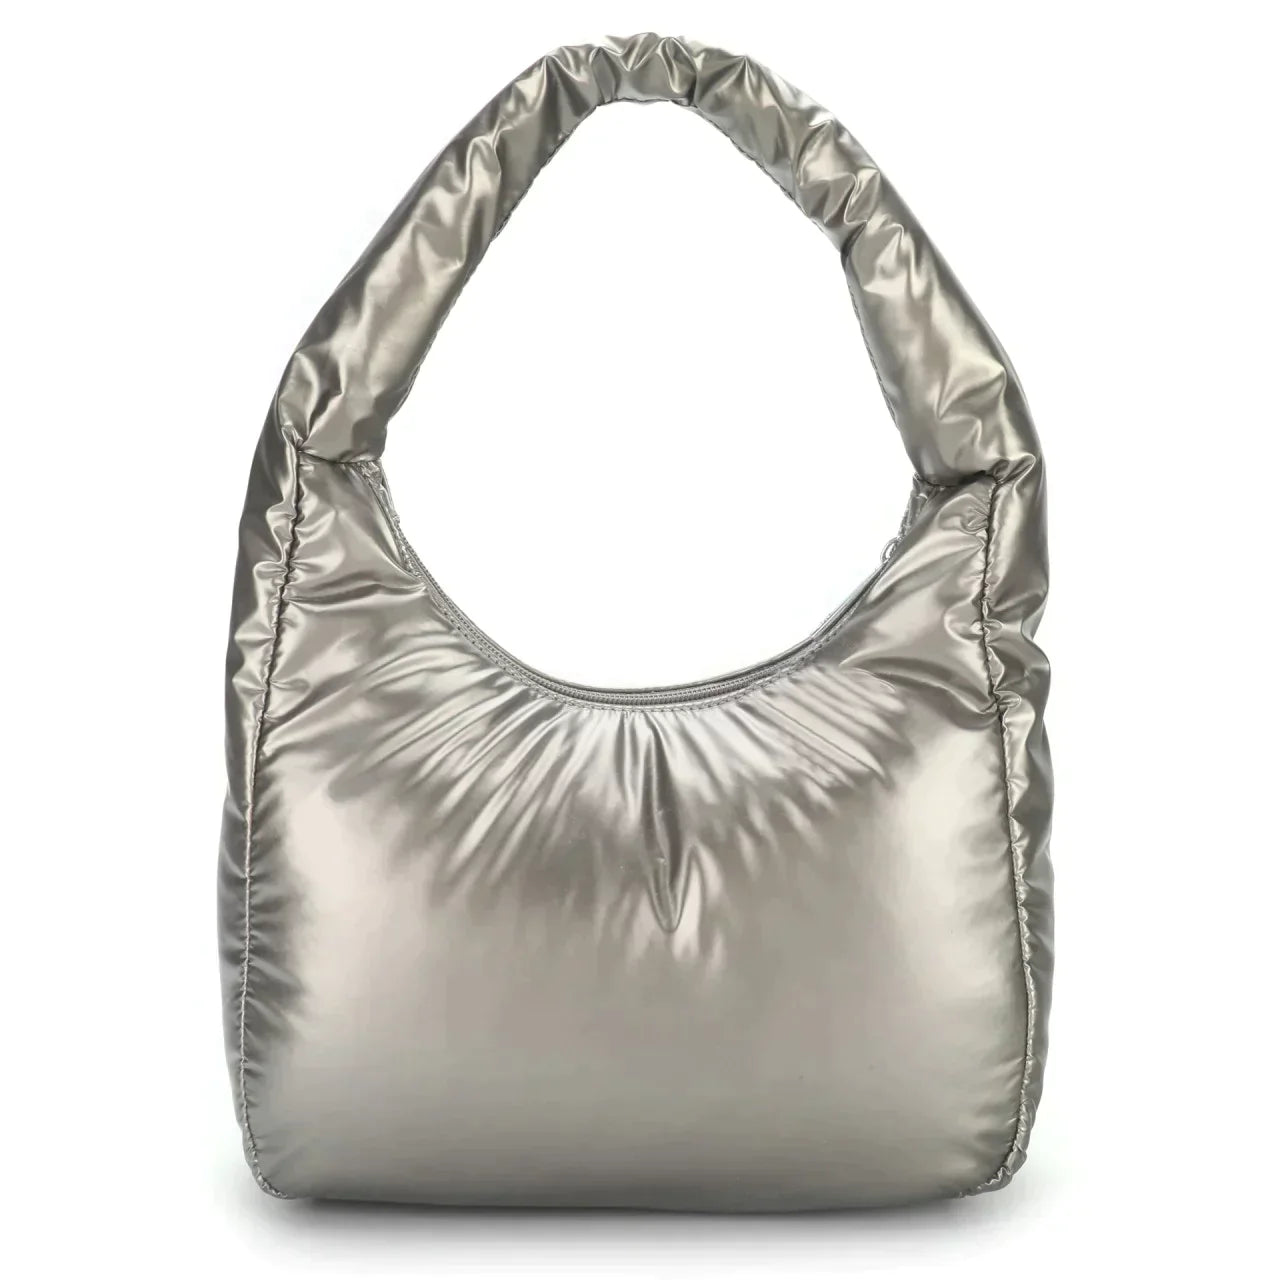 THE SOFIA PADDED MINI SHOULDER BAG - SILVER CHROME - EXCLUSIVE Bags from SILFEN - Just €62! SHOP NOW AT IAMINHATELOVE BOTH IN STORE FOR CYPRUS AND ONLINE WORLDWIDE @ IAMINHATELOVE.COM